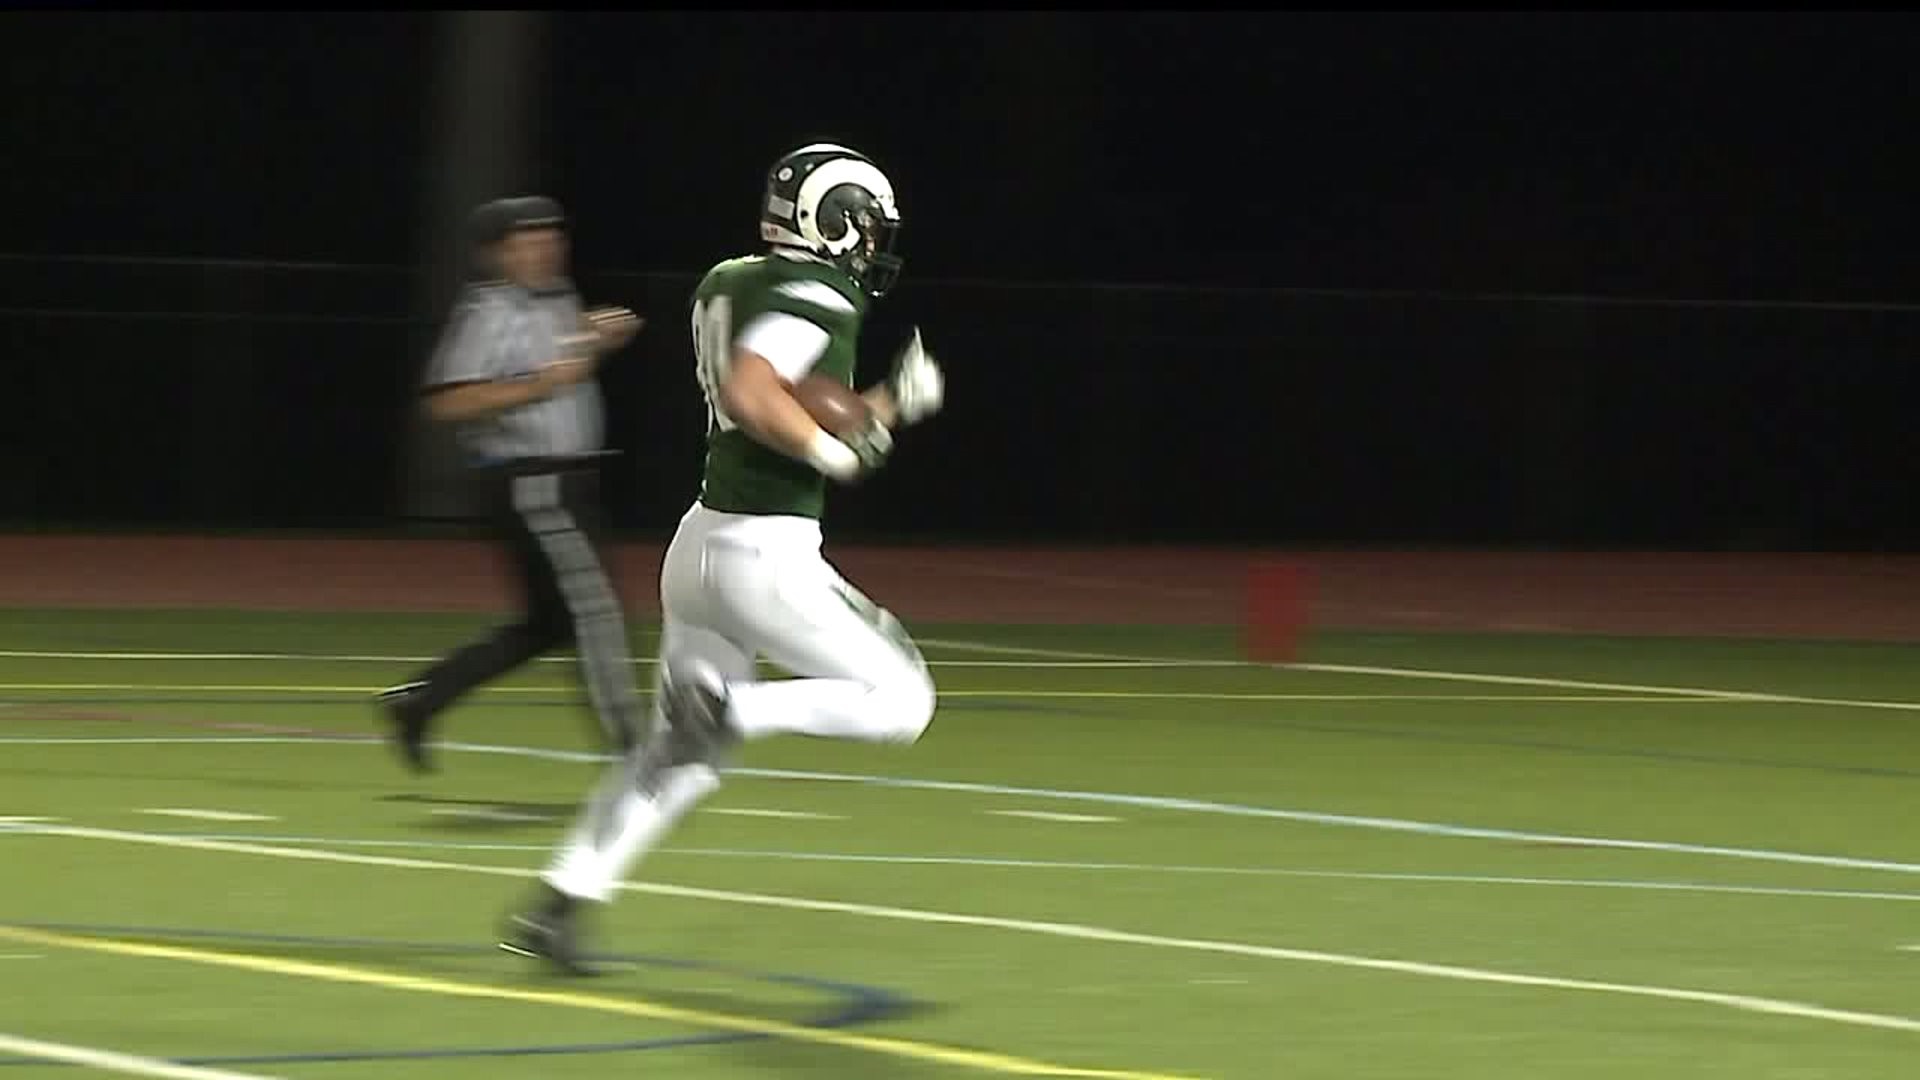 HSFF 2019 week 10 Central Dauphin East at Central Dauphin highlights